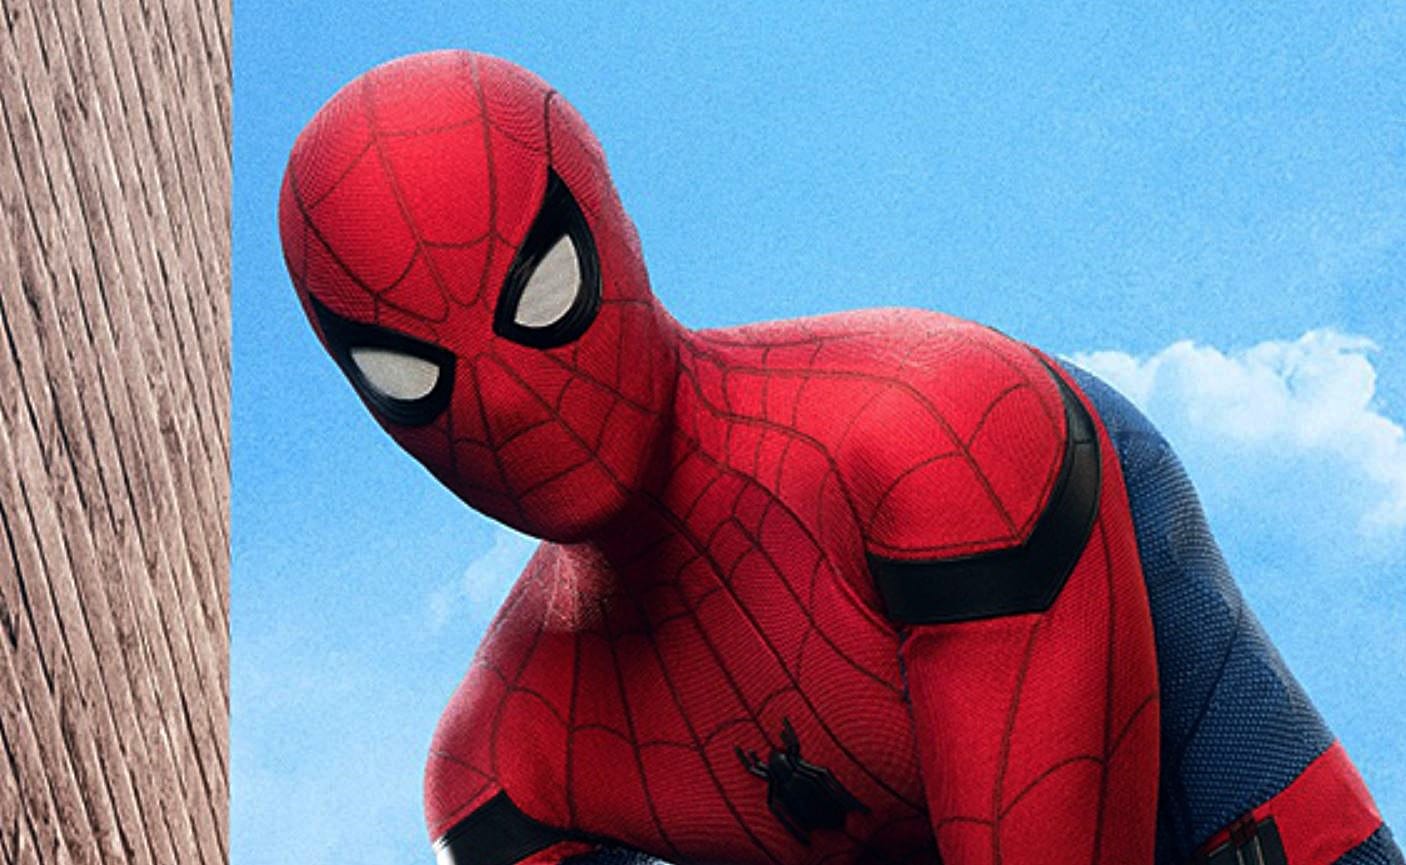 it seems the wait is over, as SuperBroMovies has reported that the first Spider-Man: Far From Home trailer will debut this upcoming Tuesday.